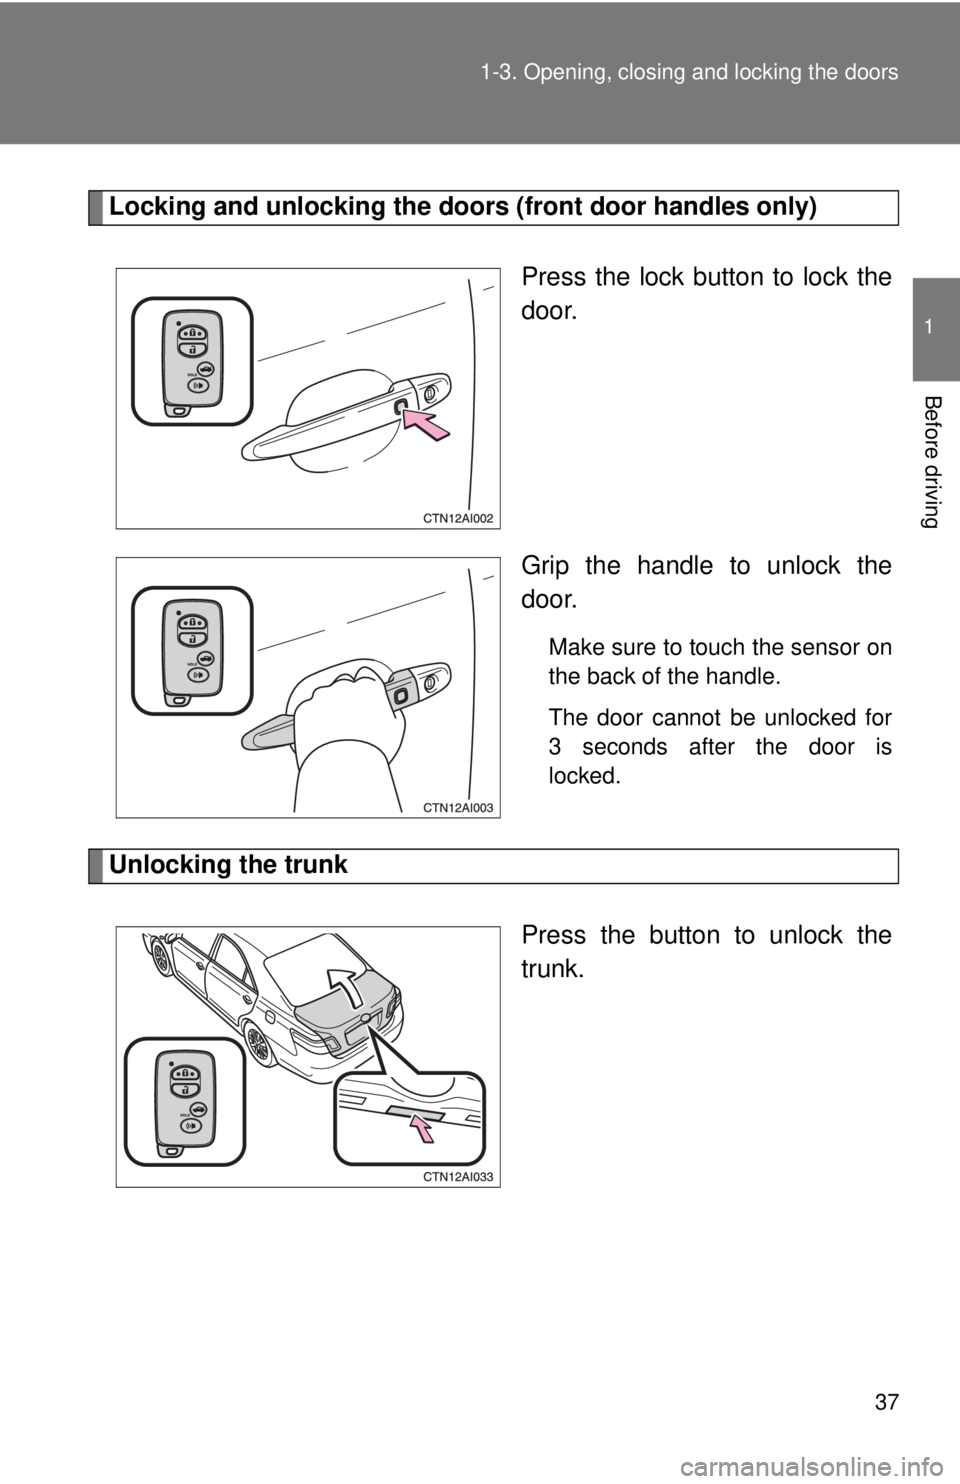 TOYOTA CAMRY HV 2009 Owners Guide 37
1-3. Opening, closing and locking the doors
1
Before driving
Locking and unlocking the doors (front door handles only)
Press the lock button to lock the
door.
Grip the handle to unlock the
door.
Ma